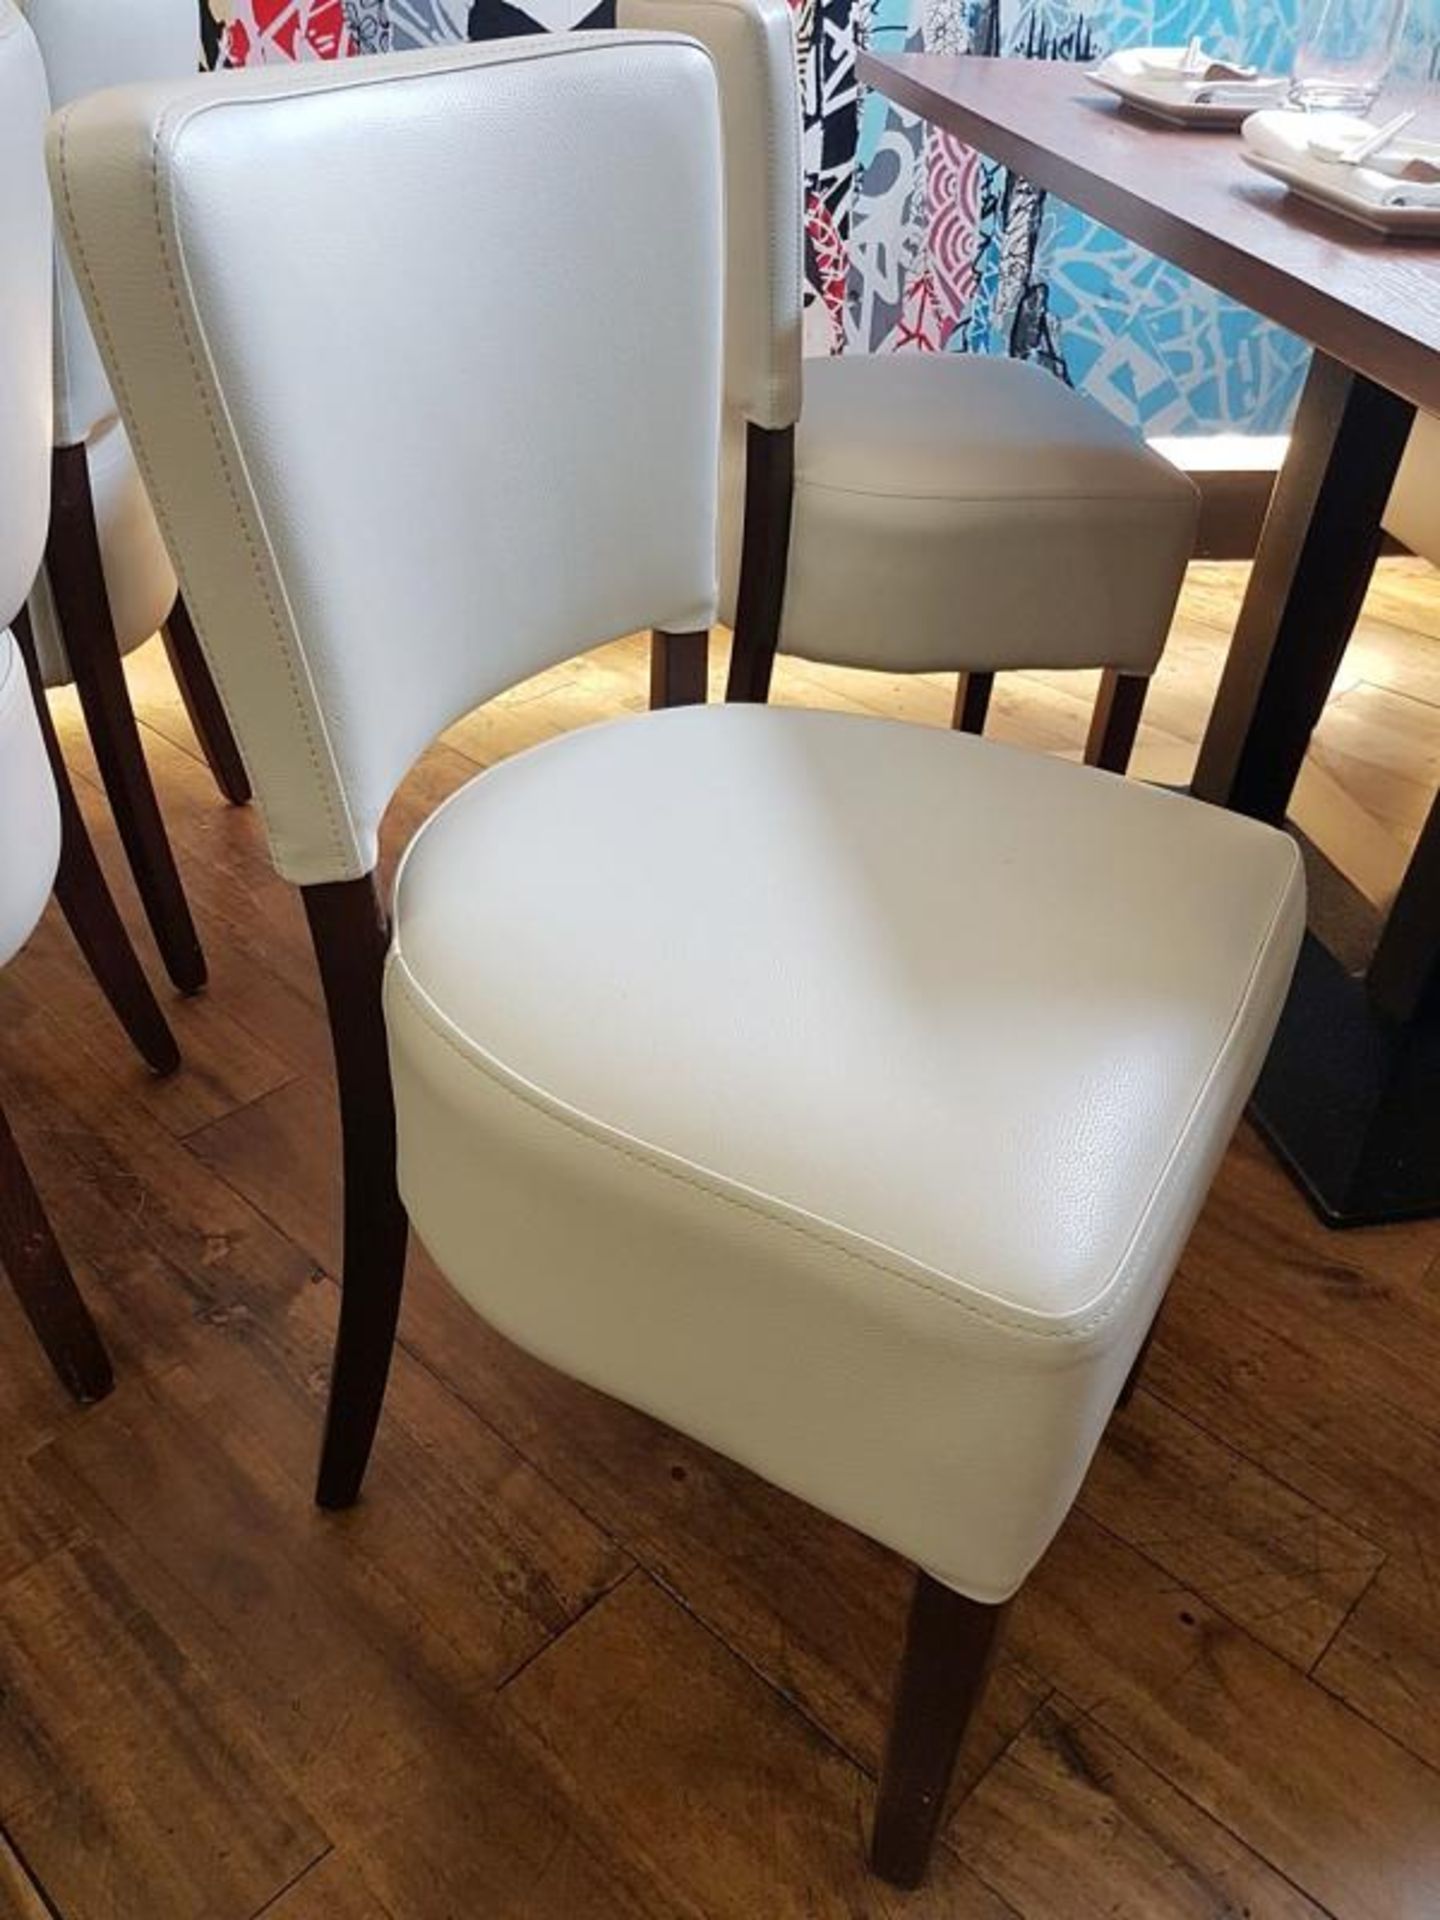 6 x Upholstered Restaurant Bar Chairs - Covered In A Light Cream Faux Leather